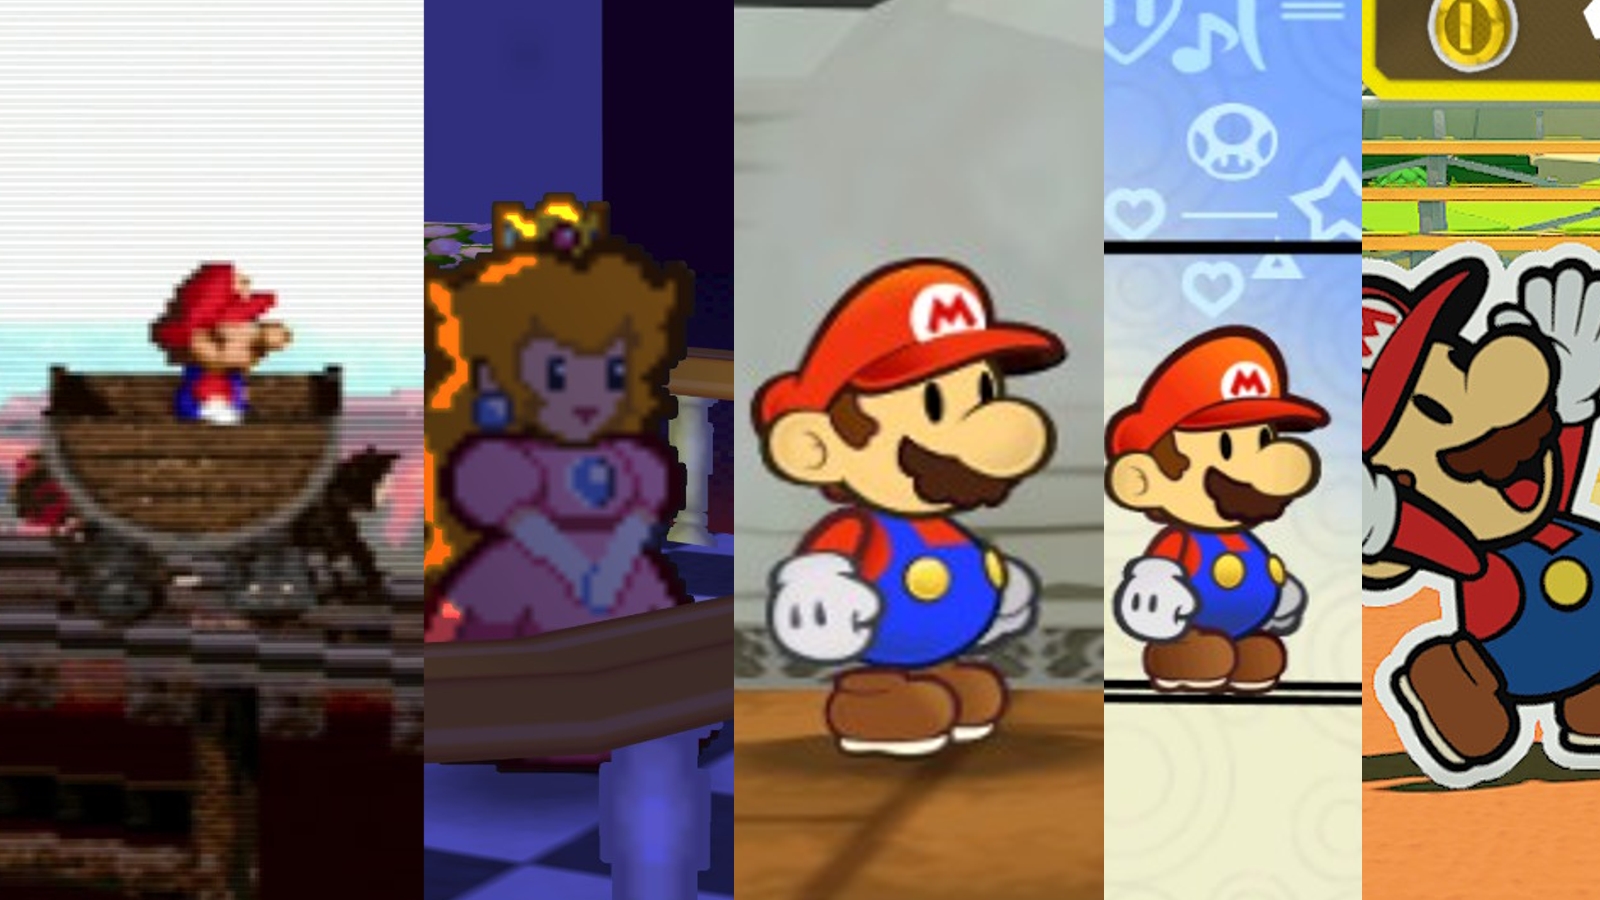 Paper Mario is still amazing on Switch, but makes me long for the RPG  sequel we'll never get